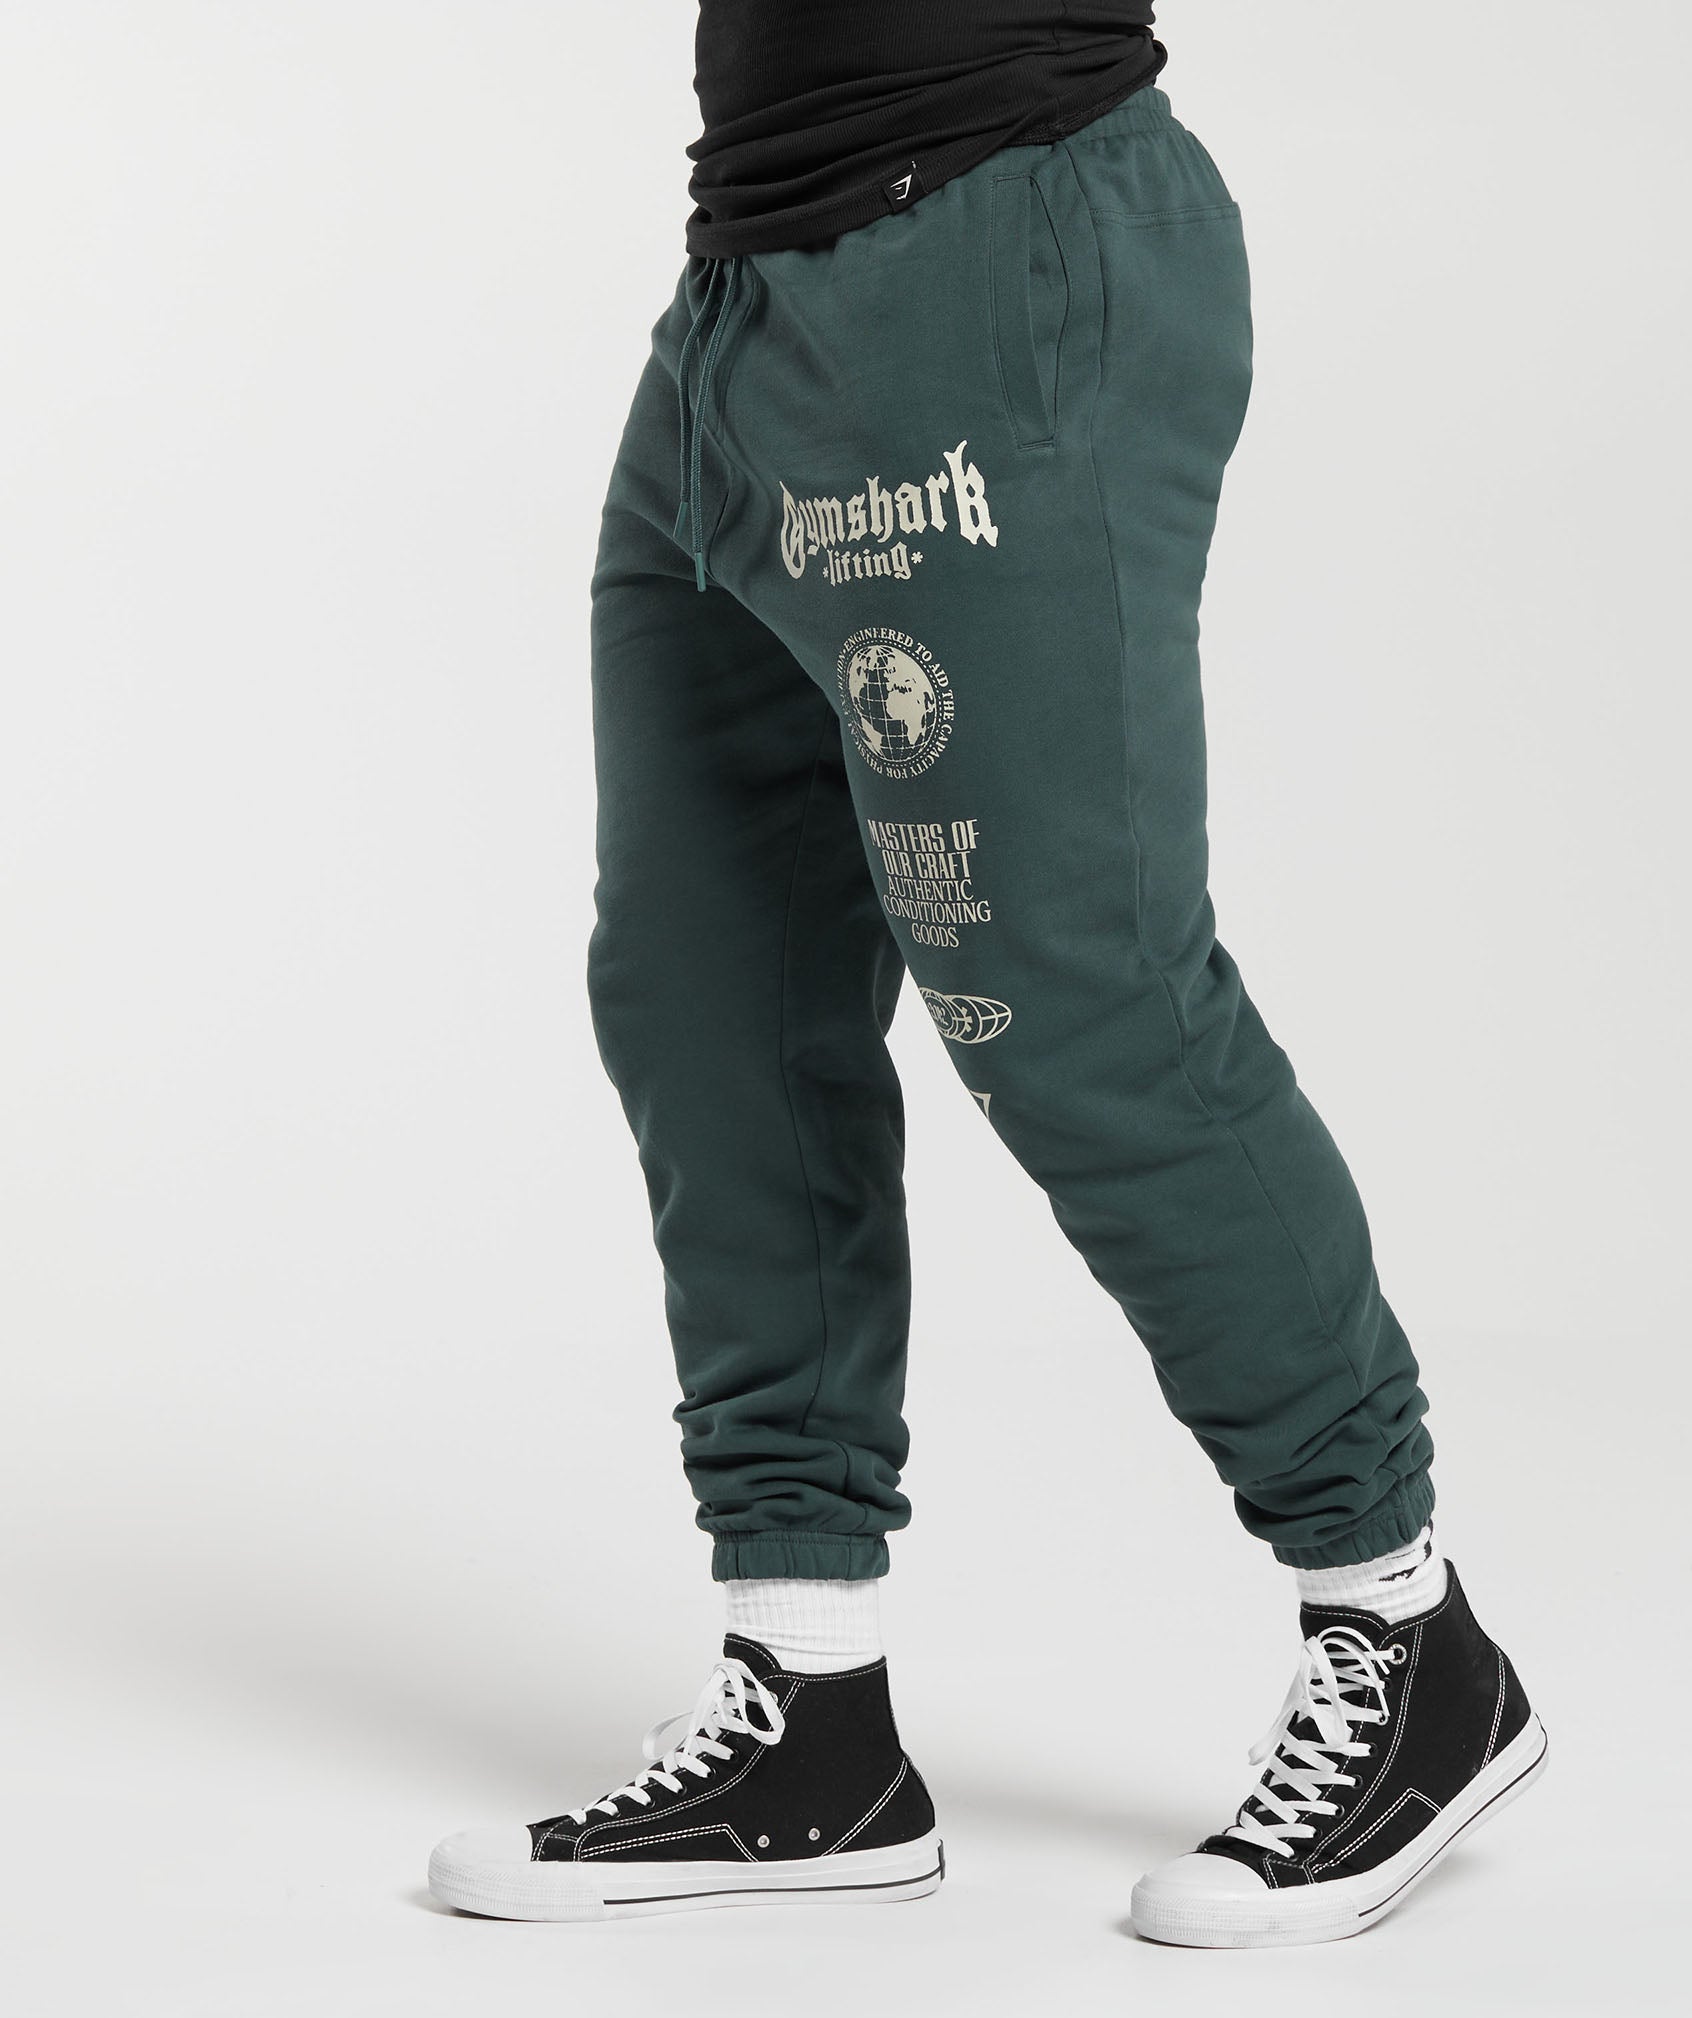 Global Lifting Oversized Joggers in Green - view 3